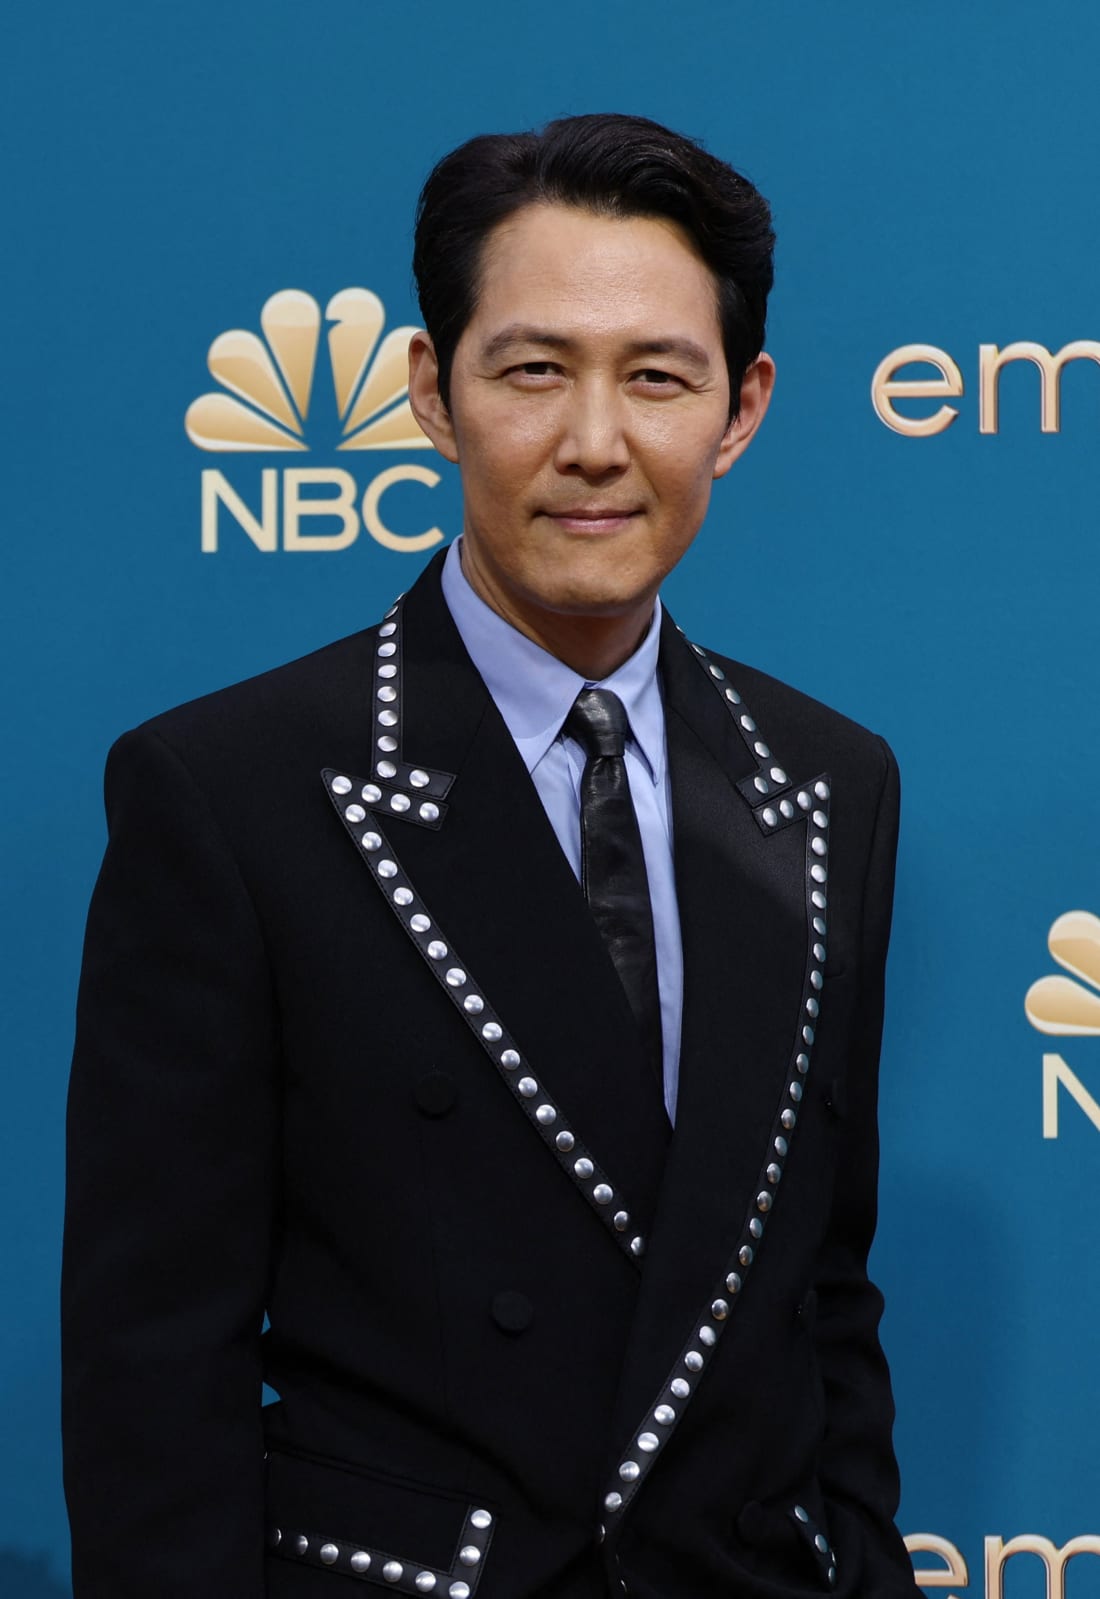 Lee Jung-jae, who went on to win Outstanding Lead Actor in a Drama series, looked suave in a studded jacket and leather tie.